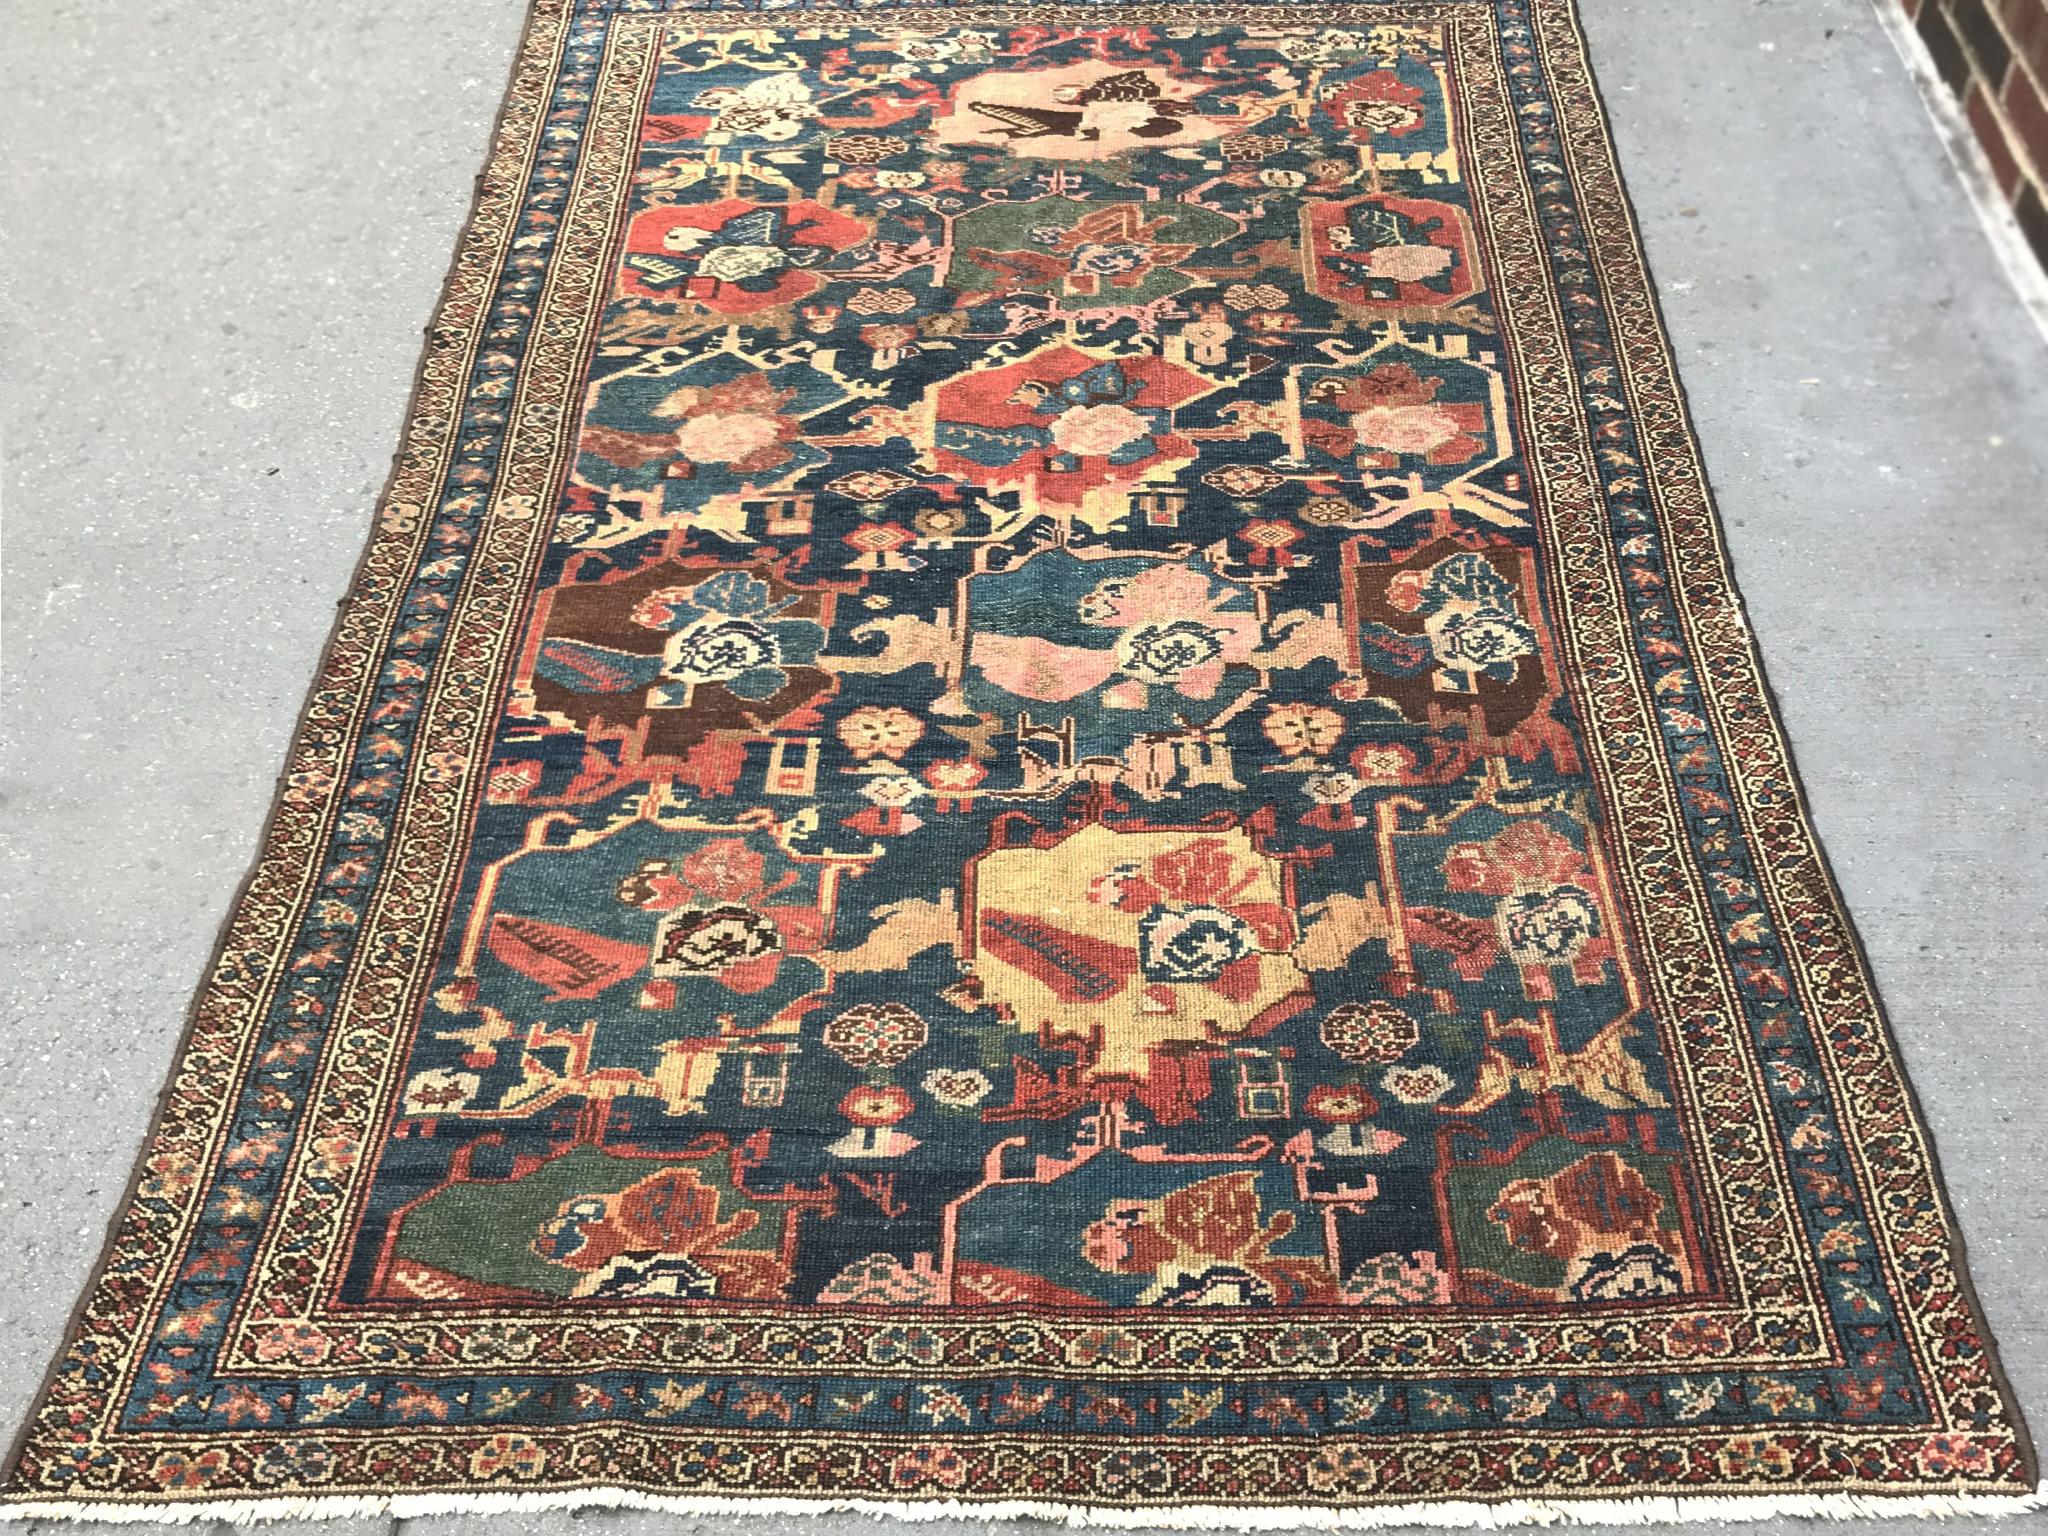 Dyed Early 20th Century Caucasian Rug